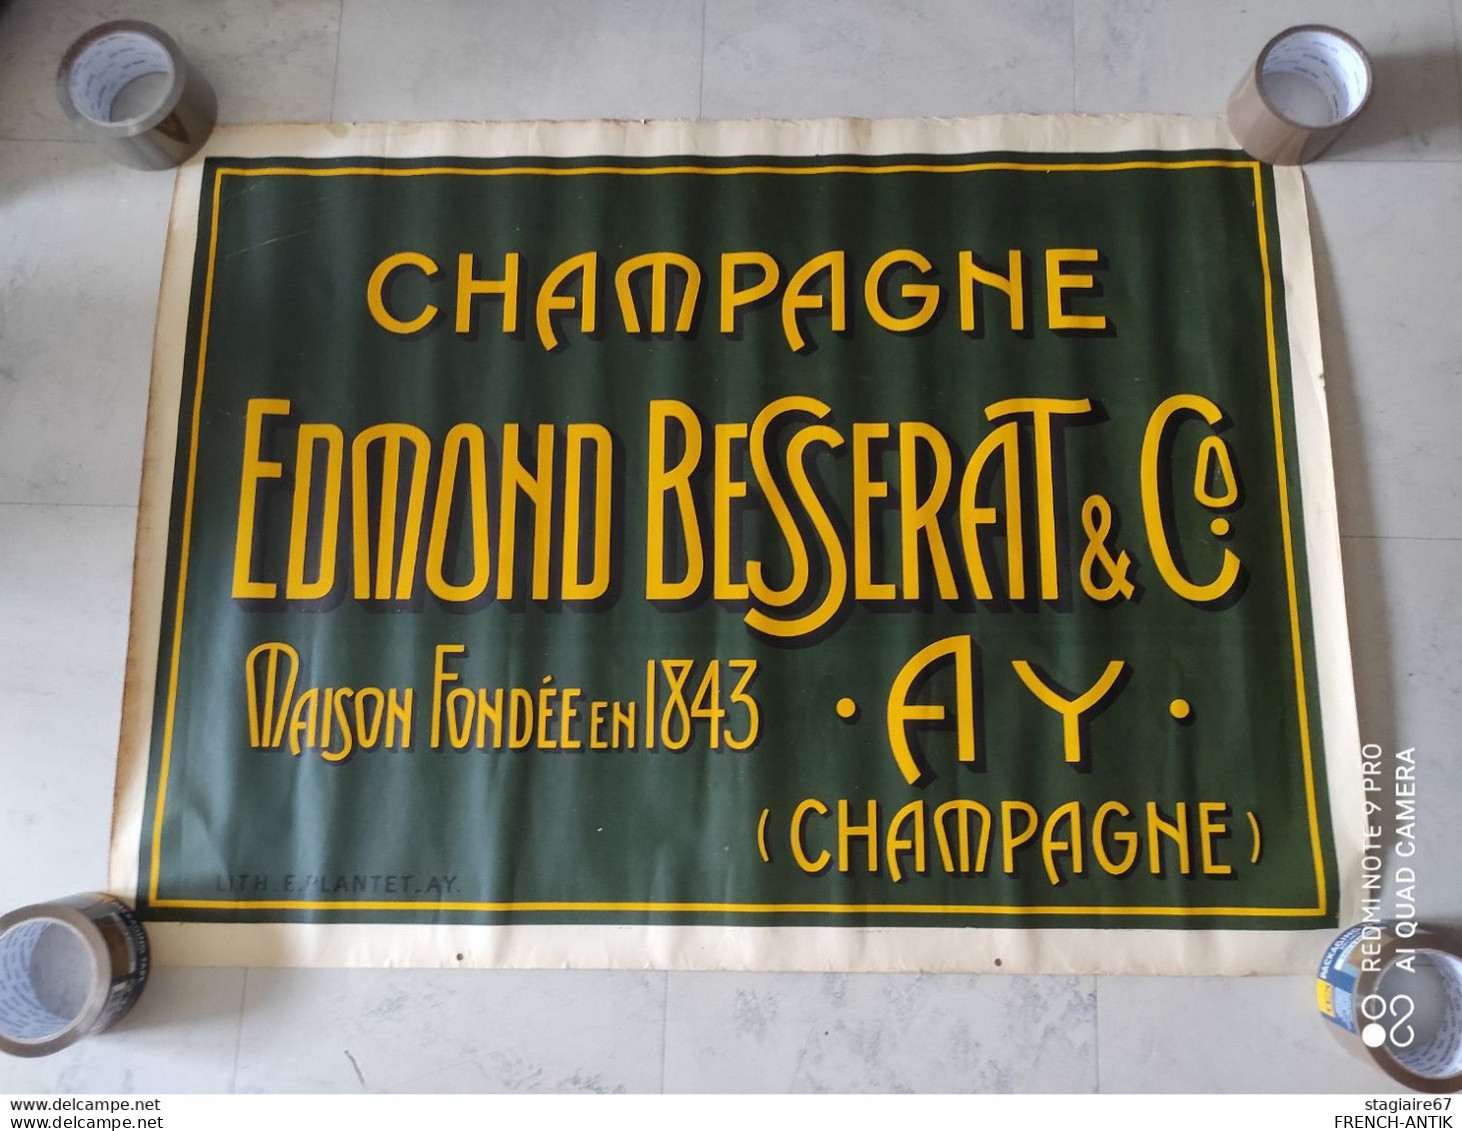 RARE AFFICHE CHAMPAGNE EDMOND BESSERAT AND CO AY MARNE FONDEE EN 1843 90X65CM - Posters